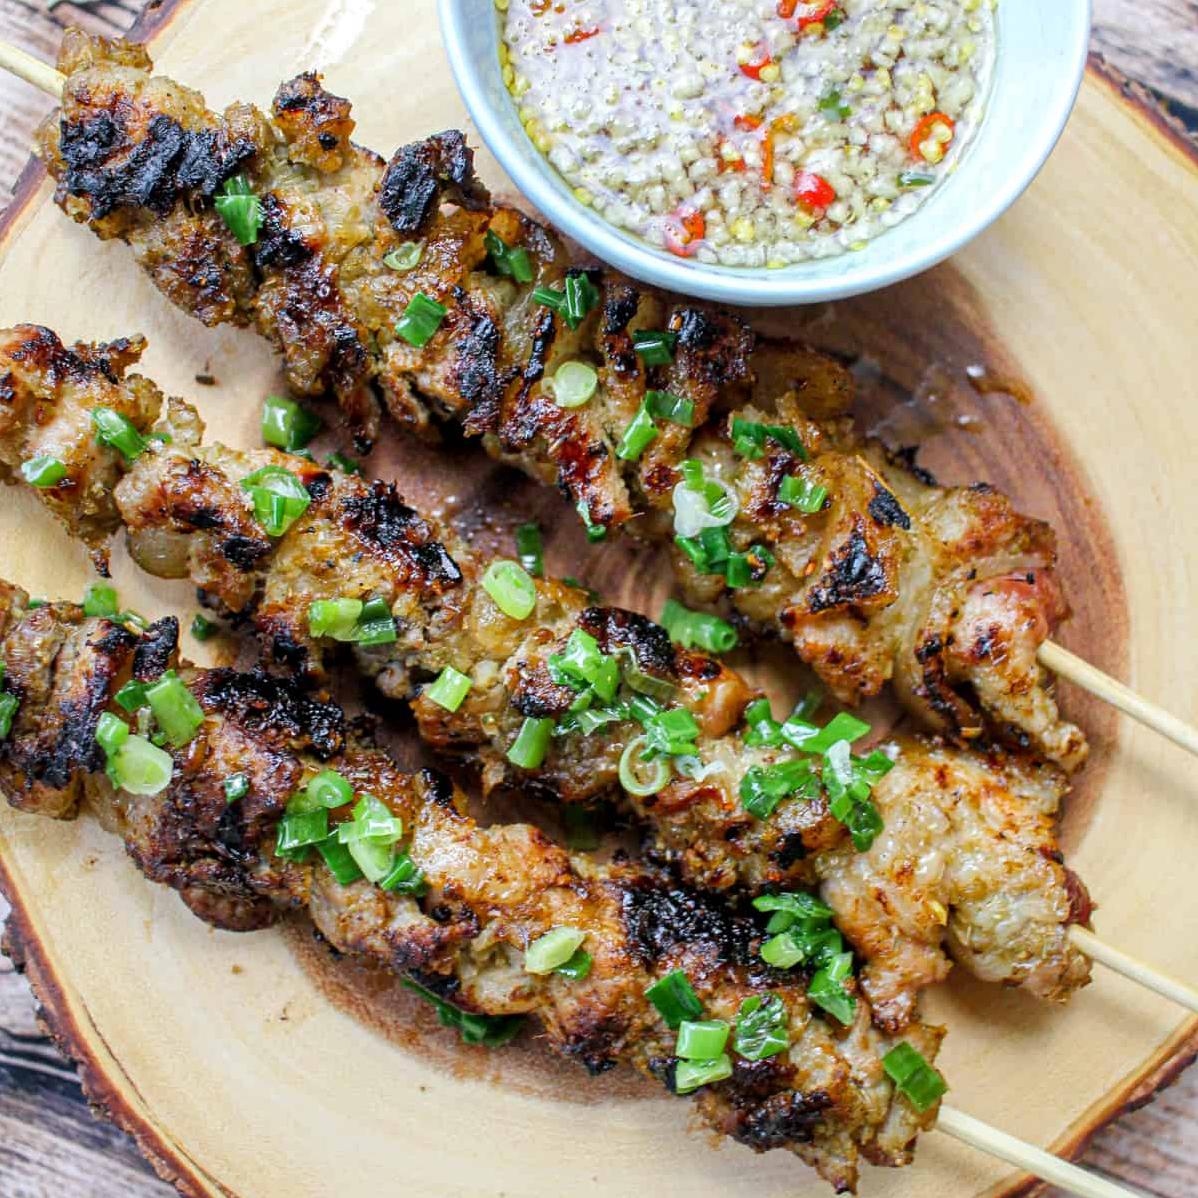  Juicy and flavorful lemongrass pork skewers, perfect for summer grilling!